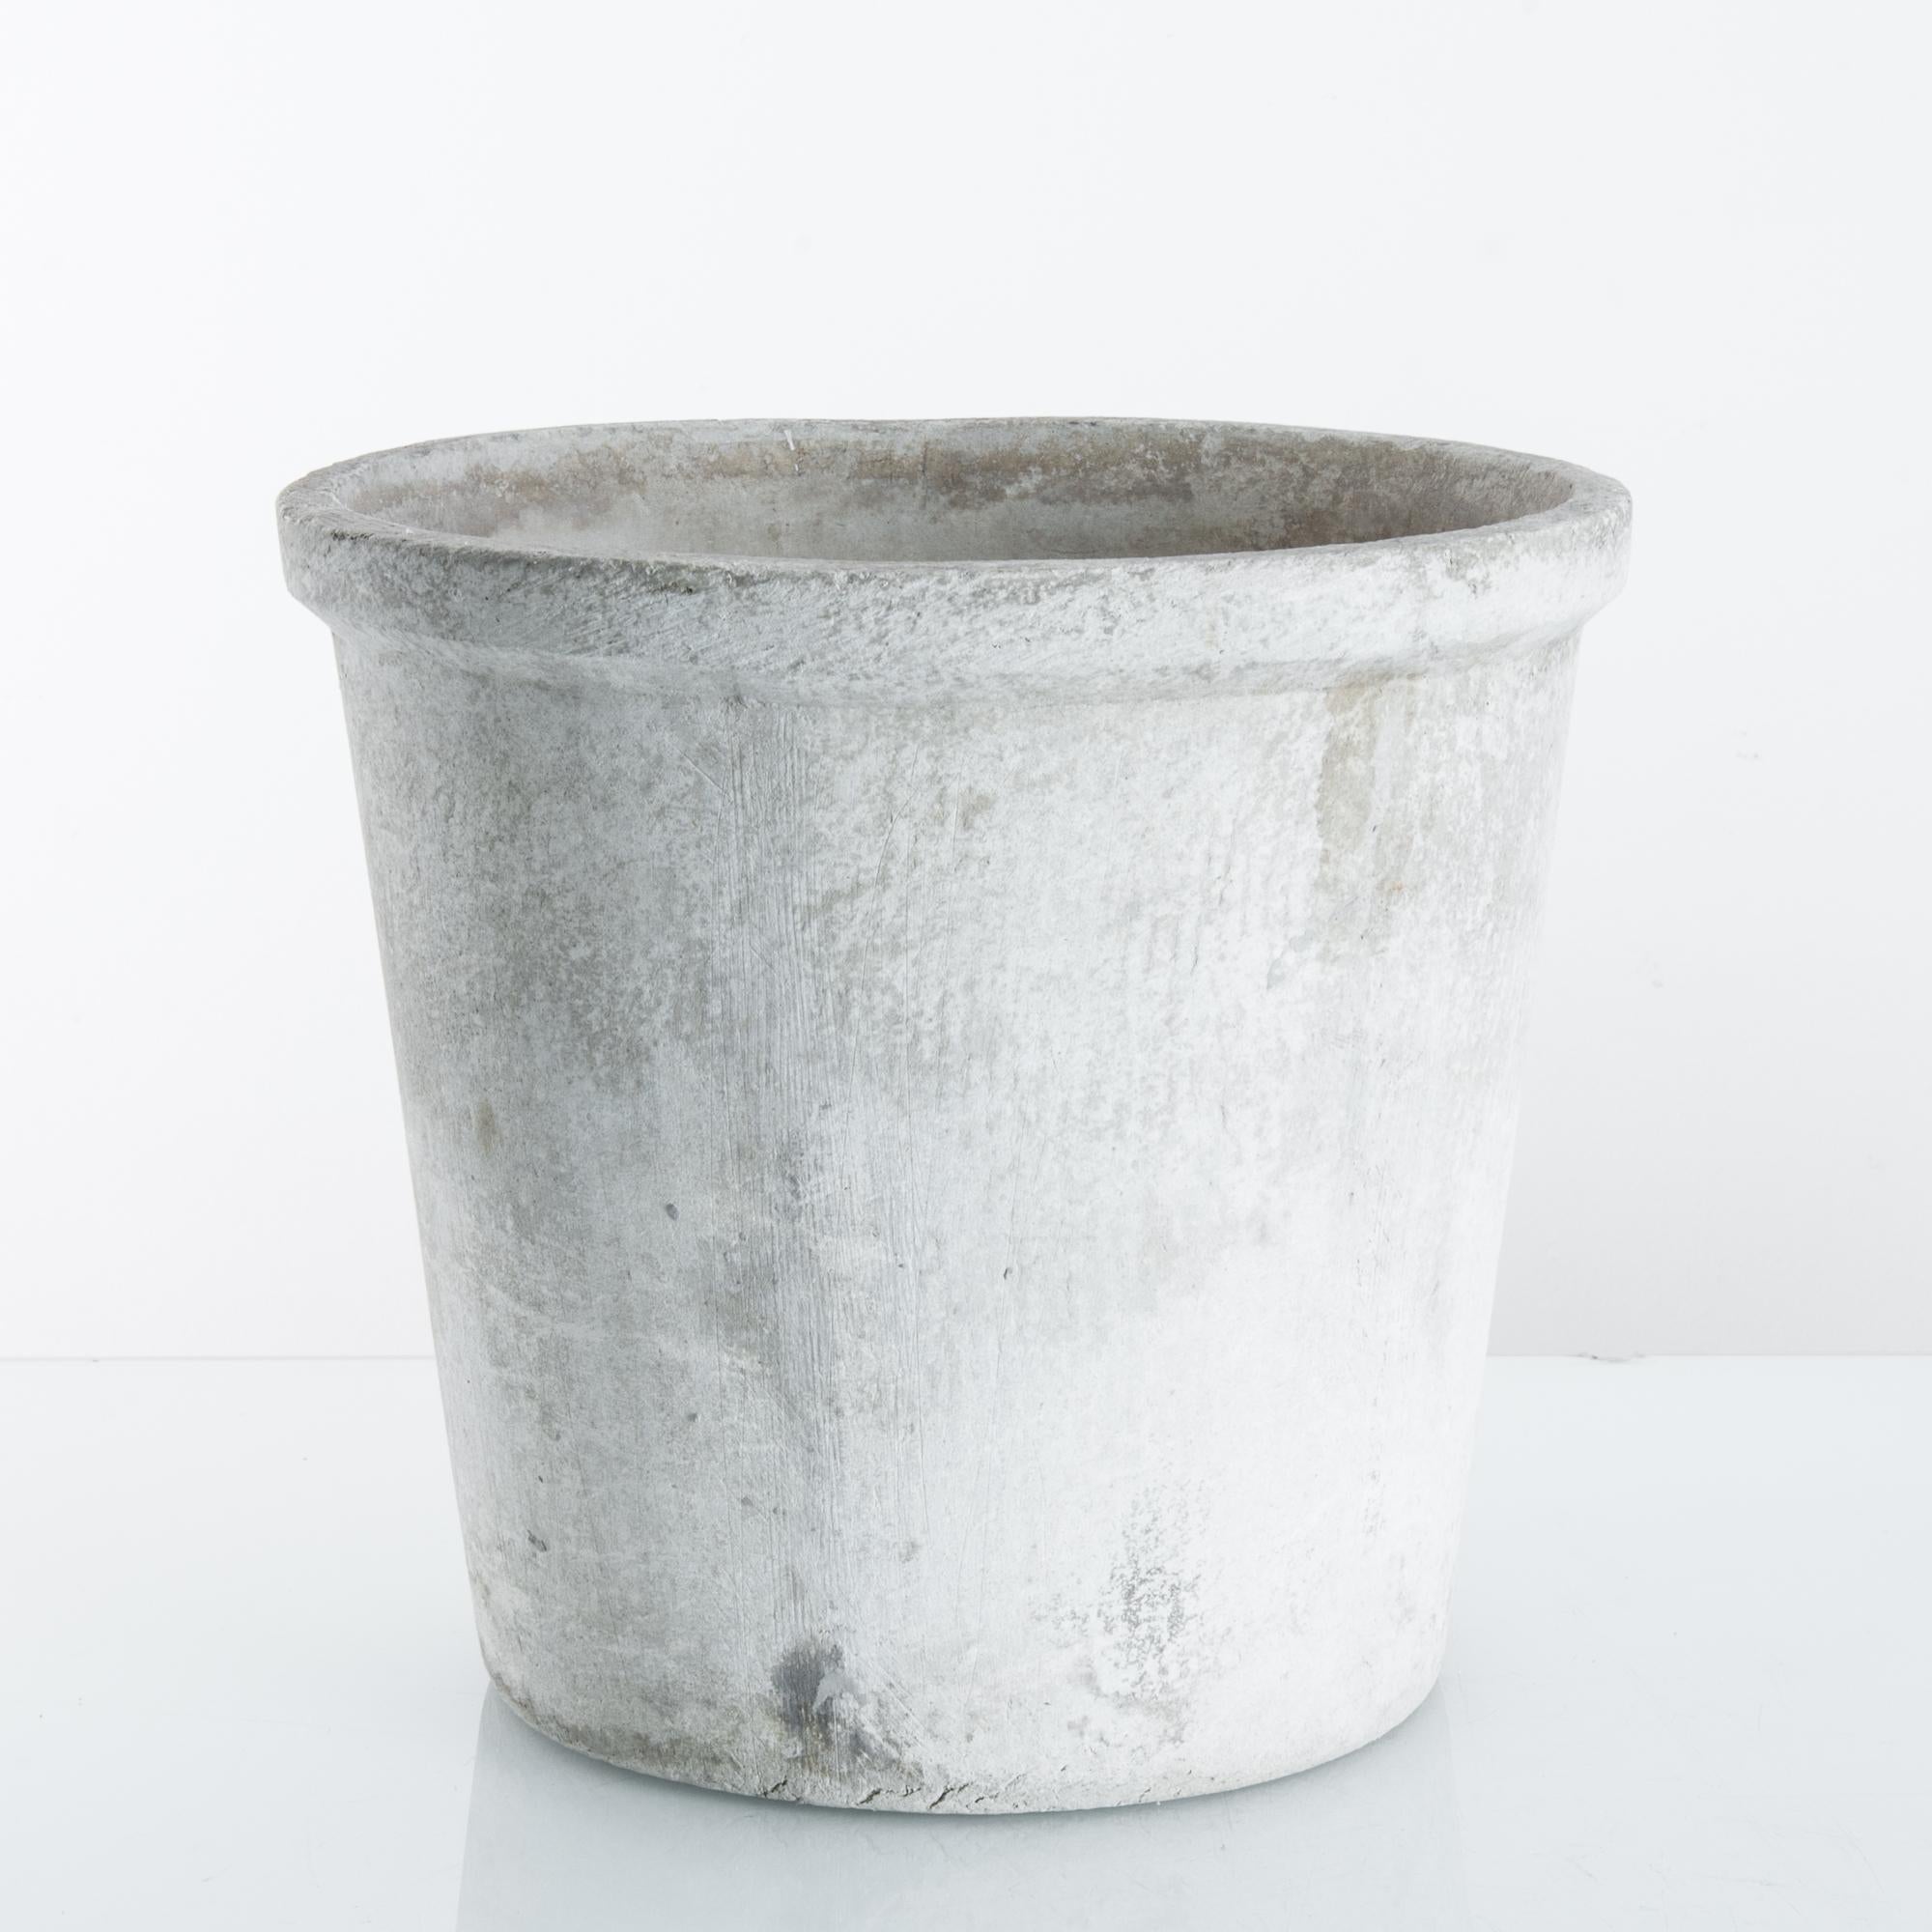 A vintage concrete planter from France, produced circa 1960. Design of the mid-century produced forms so timeless they seem obvious to us now — this chic planter being a good example. Simple, modern, and gorgeous, this little planter is ready for